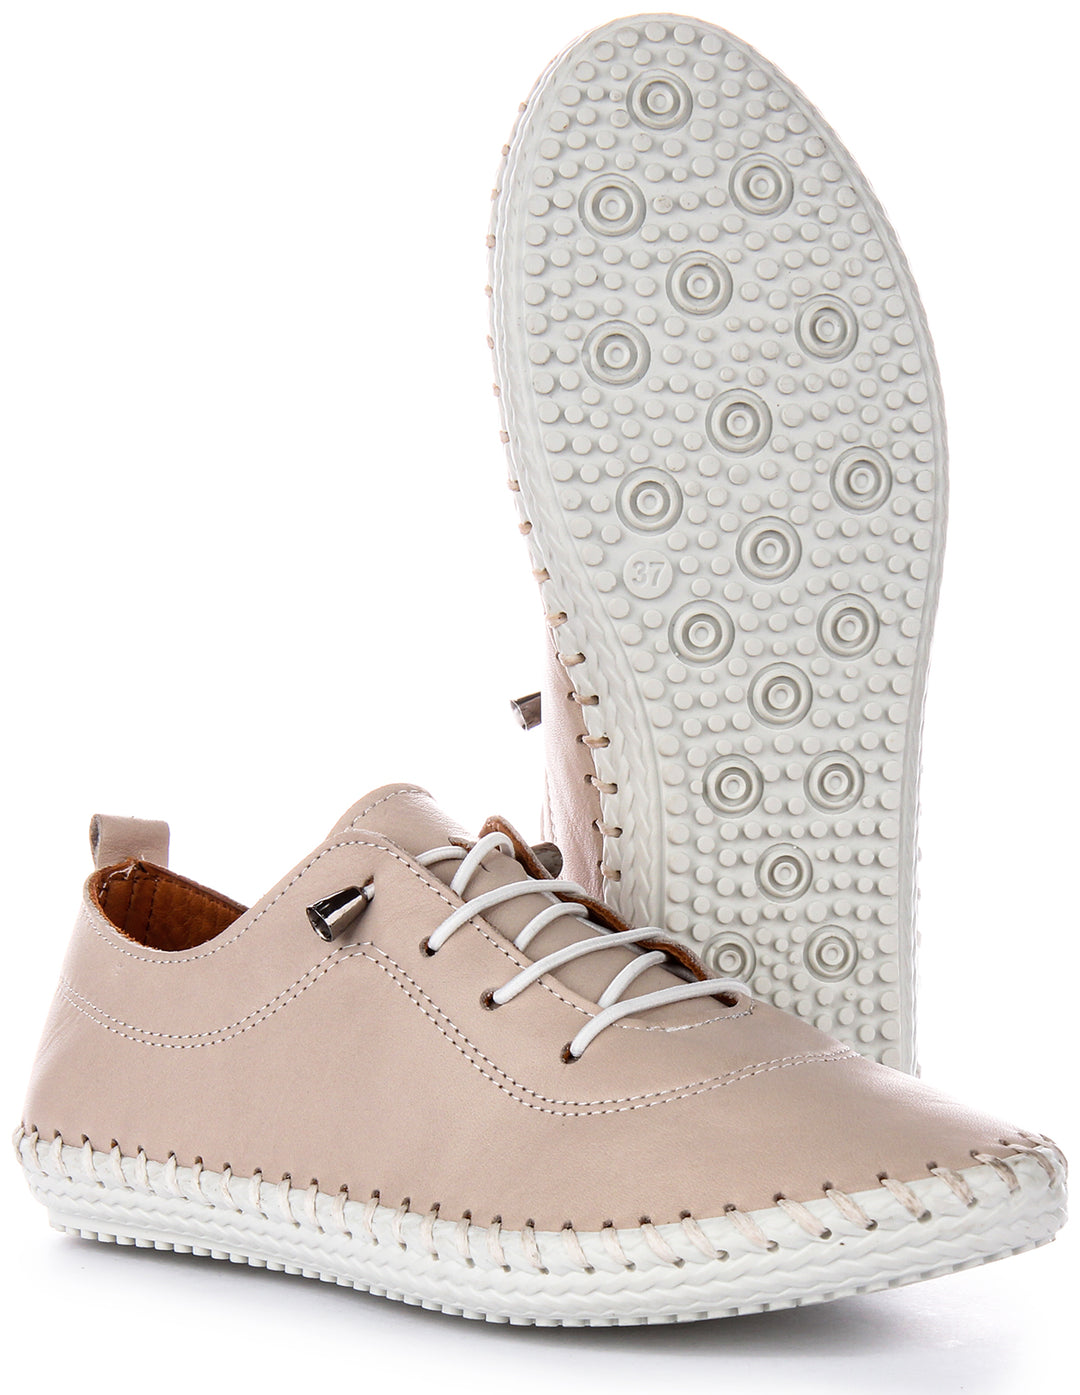 Justinreess England Lexi 2 In Taupe For Women